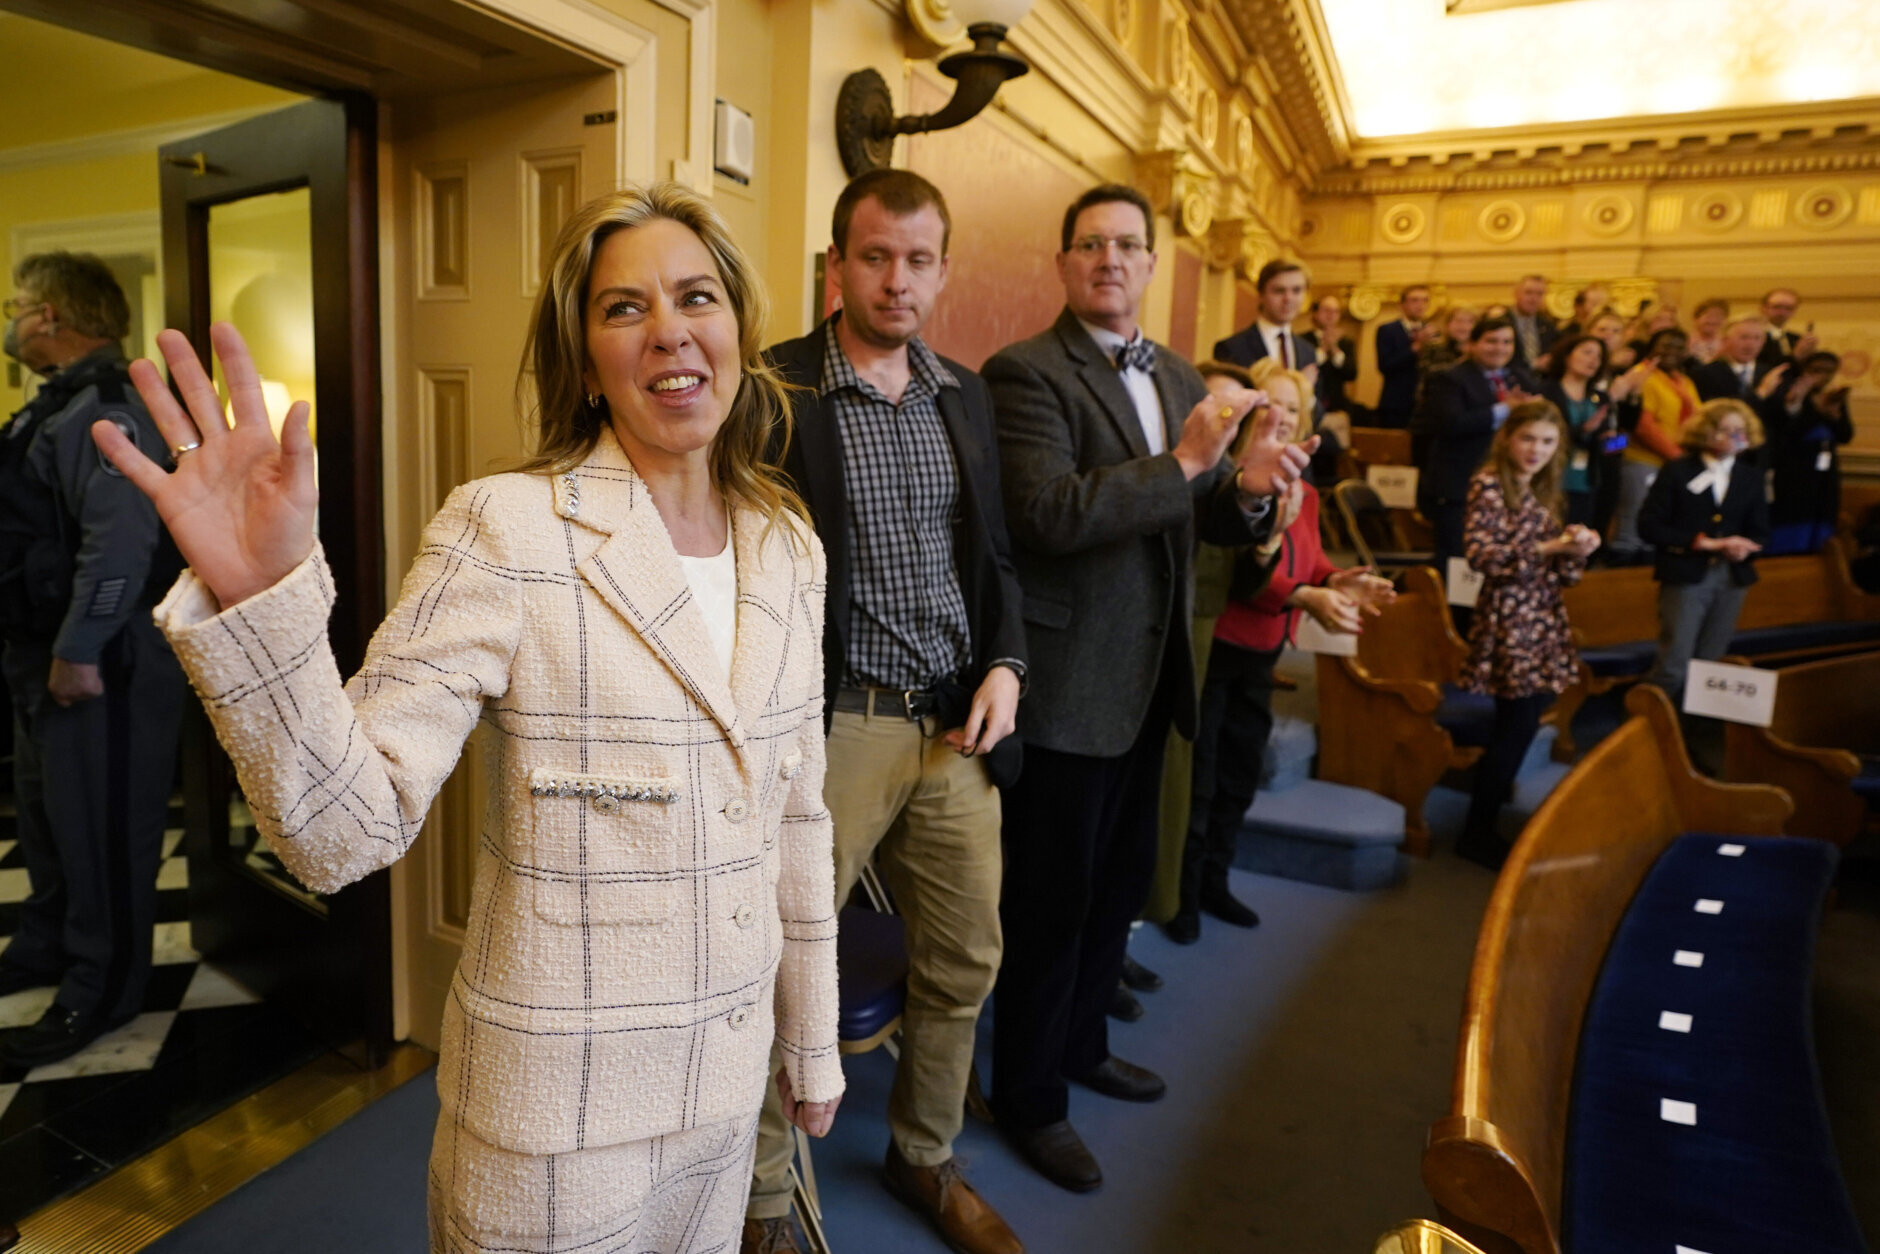 Virginia first lady, Suzanne Youngkin, waves as she is introduced in the Gallery as she arrives for her husband's State of the Commonwealth address before a joint session of the Virginia General Assembly in the House chambers at the Capitol Monday Jan. 17, 2022, in Richmond, Va. (AP Photo/Steve Helber)